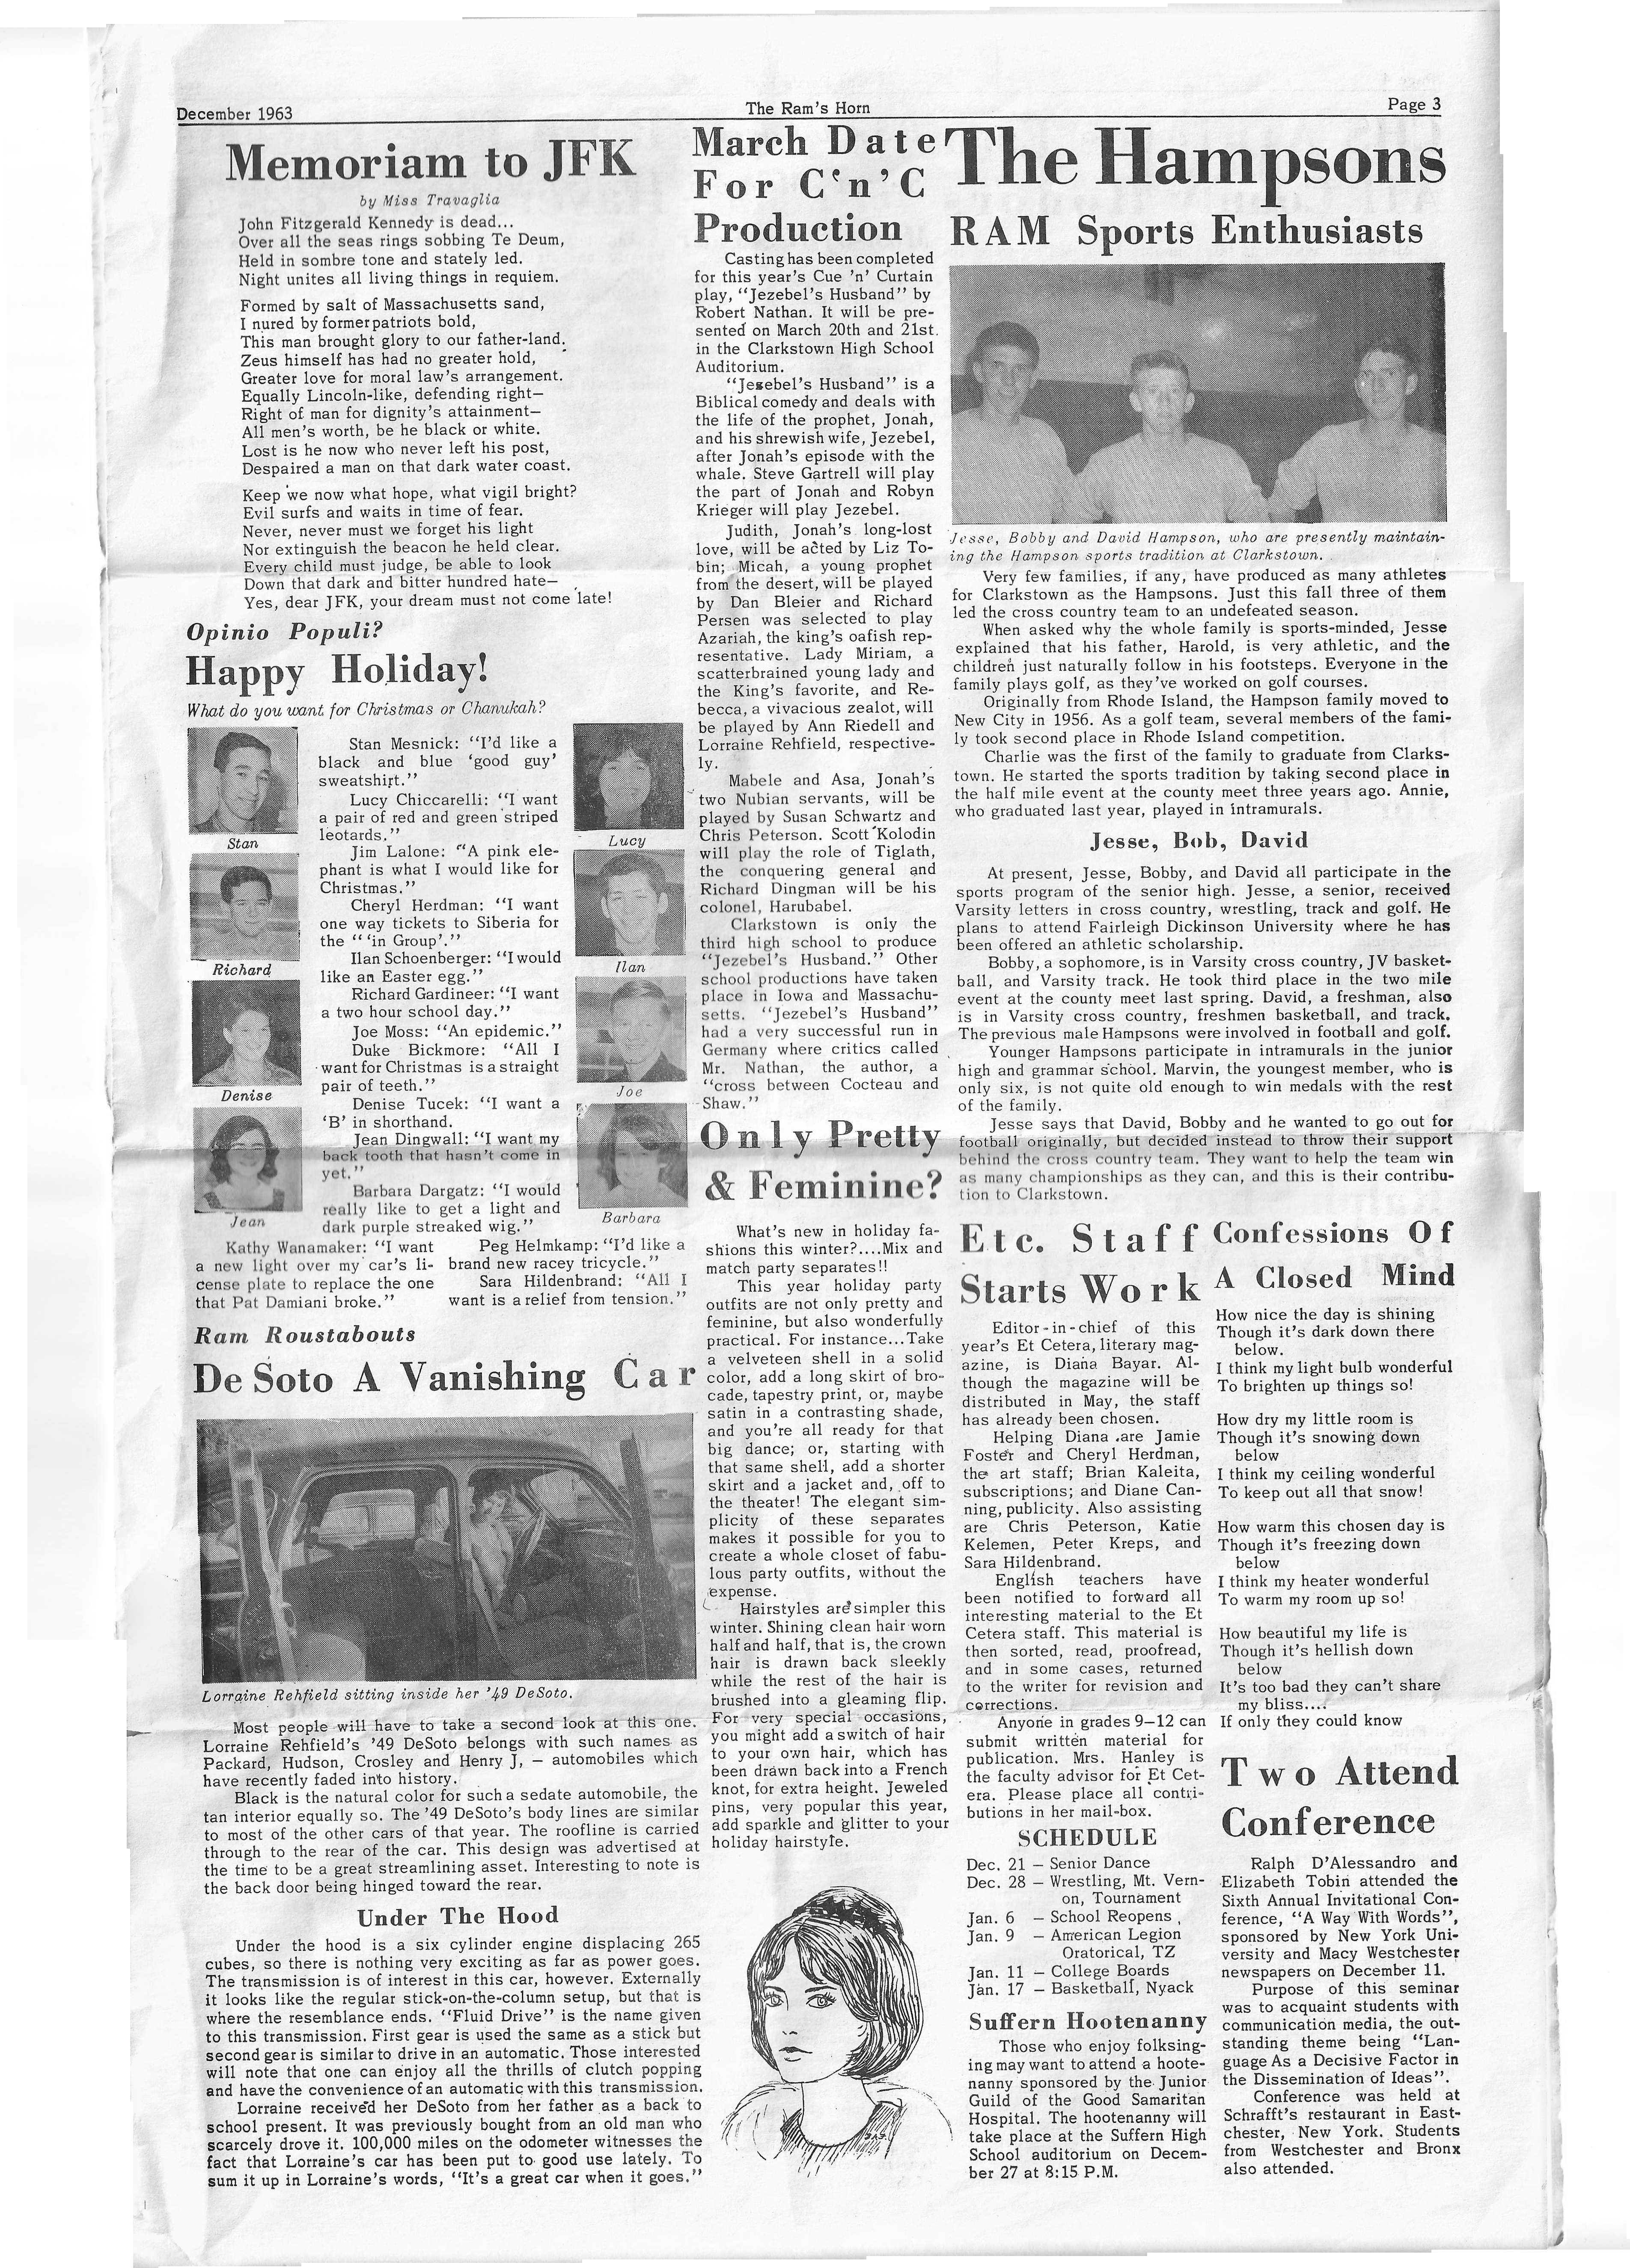 The Ram's Horn - Dec. '63 - Page 3